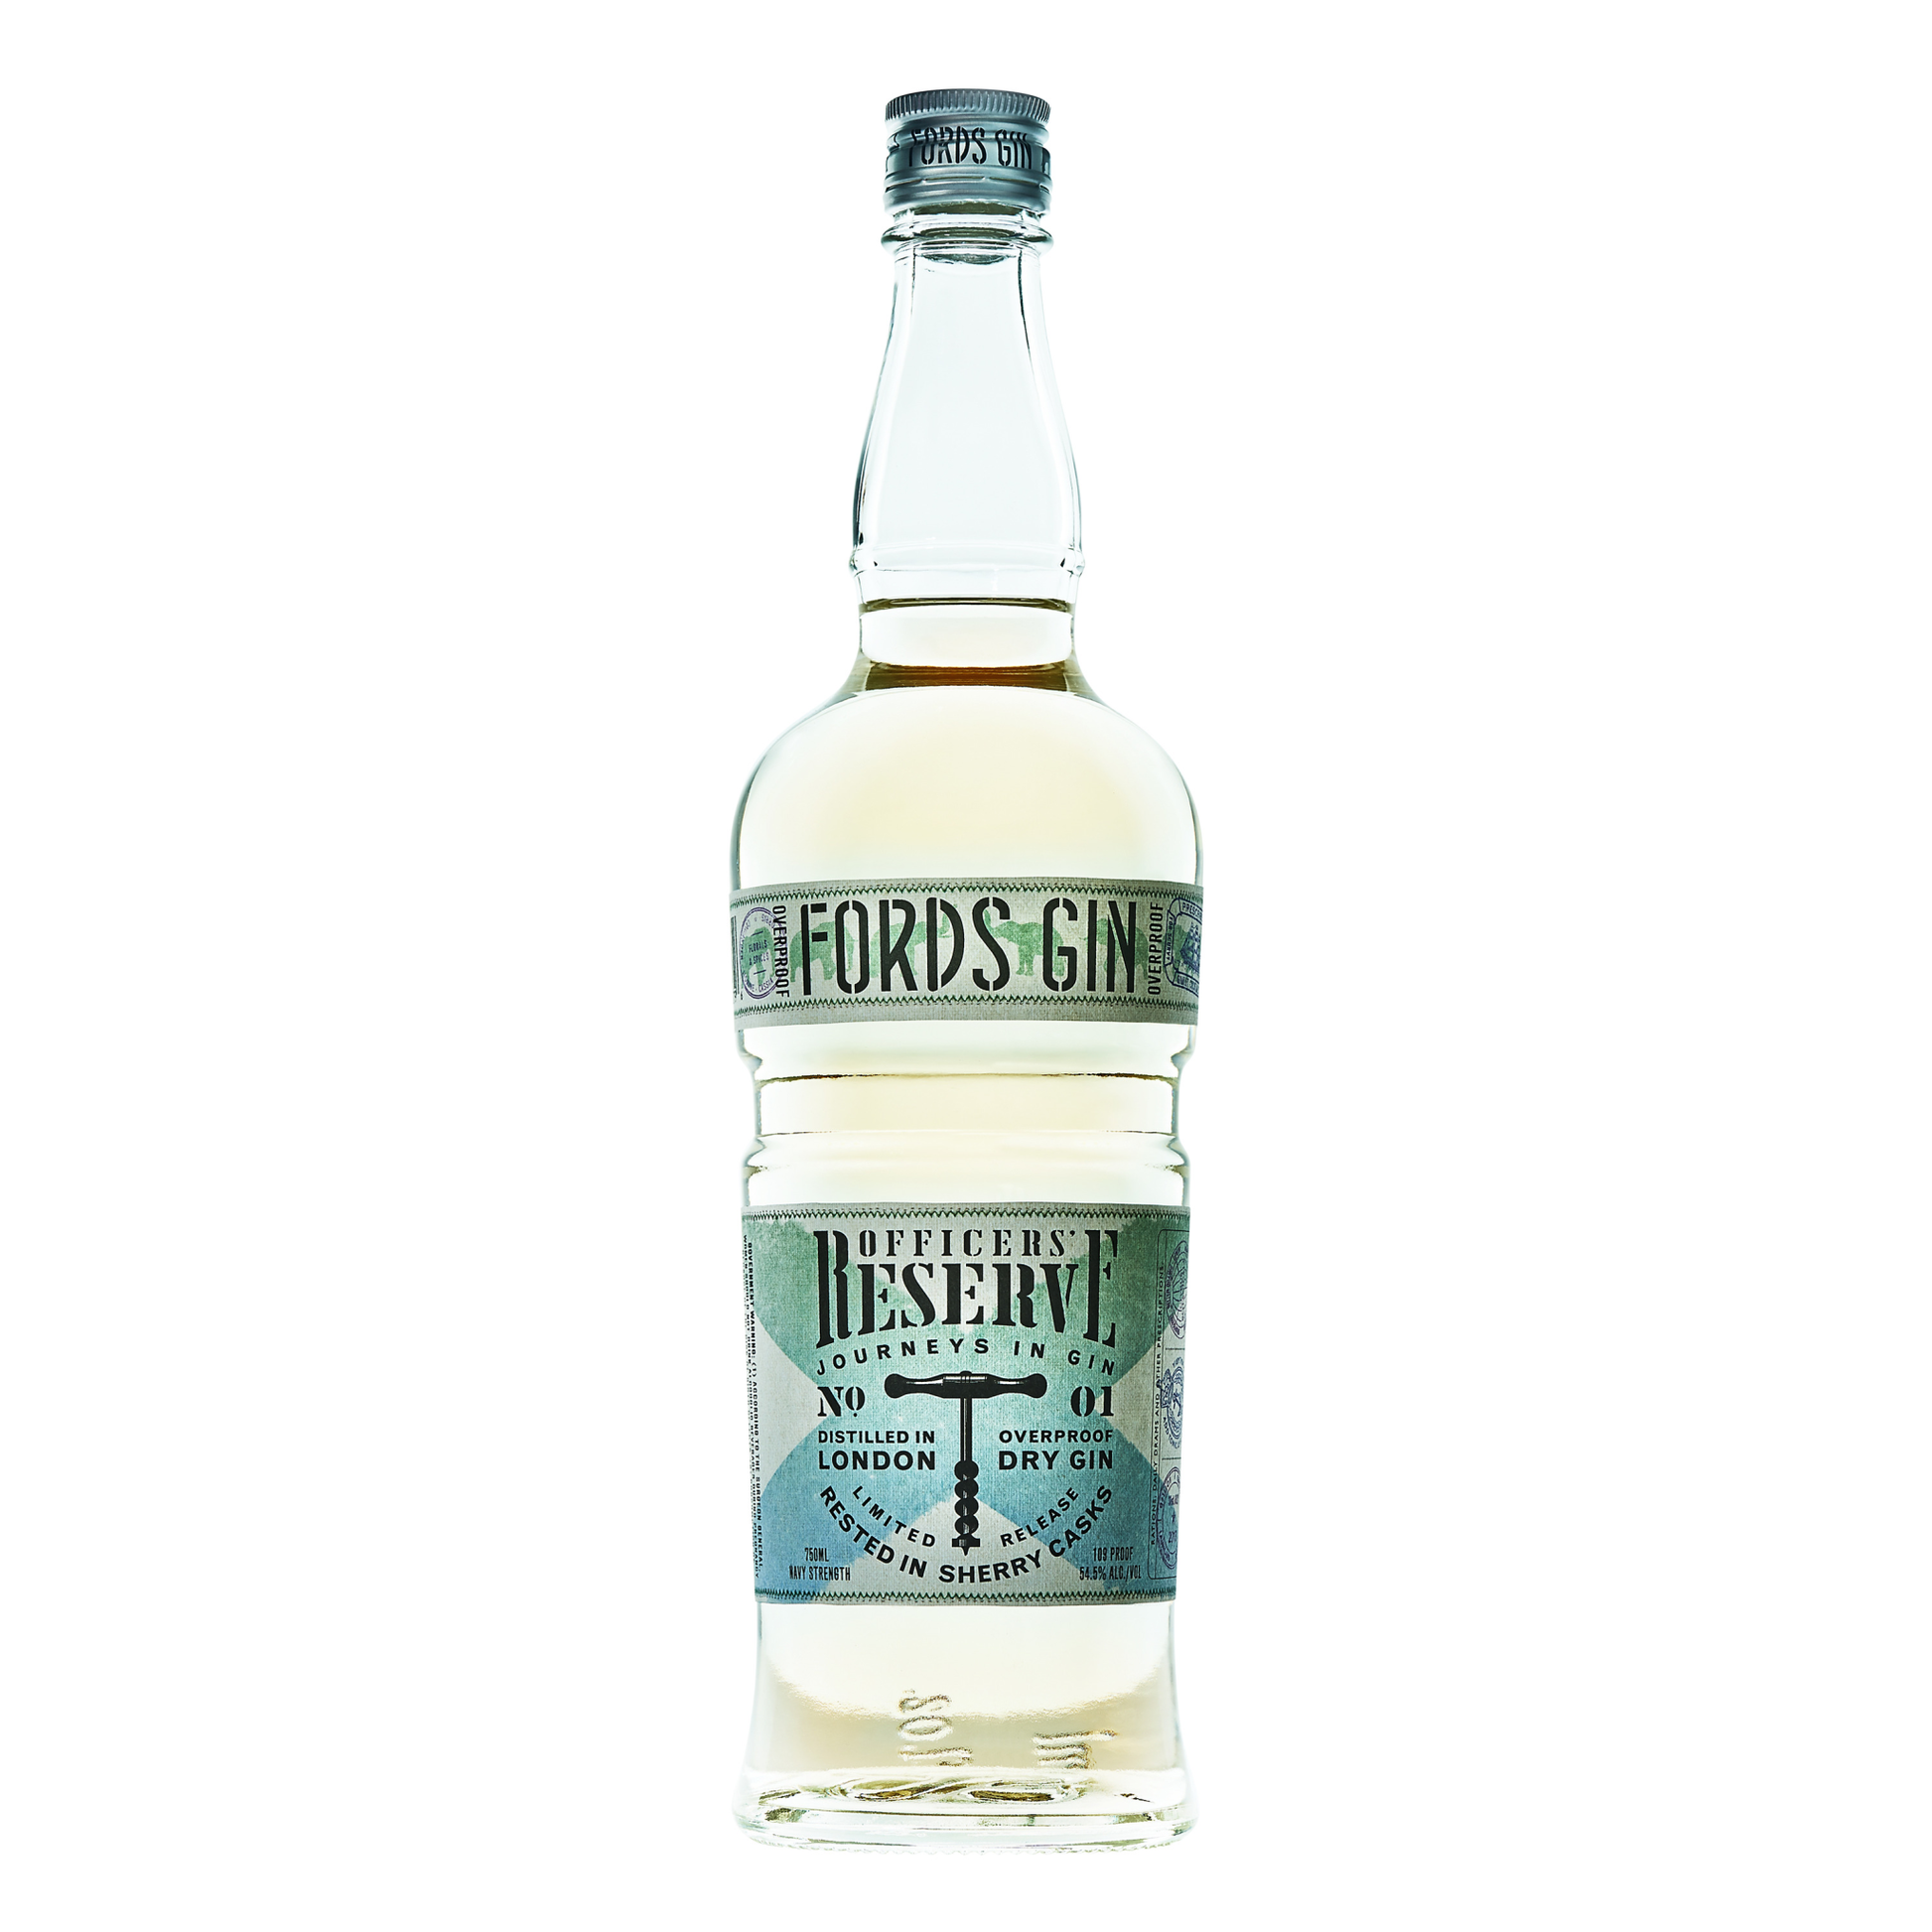 Fords Gin Officers Reserve Dry Gin - Liquor Geeks